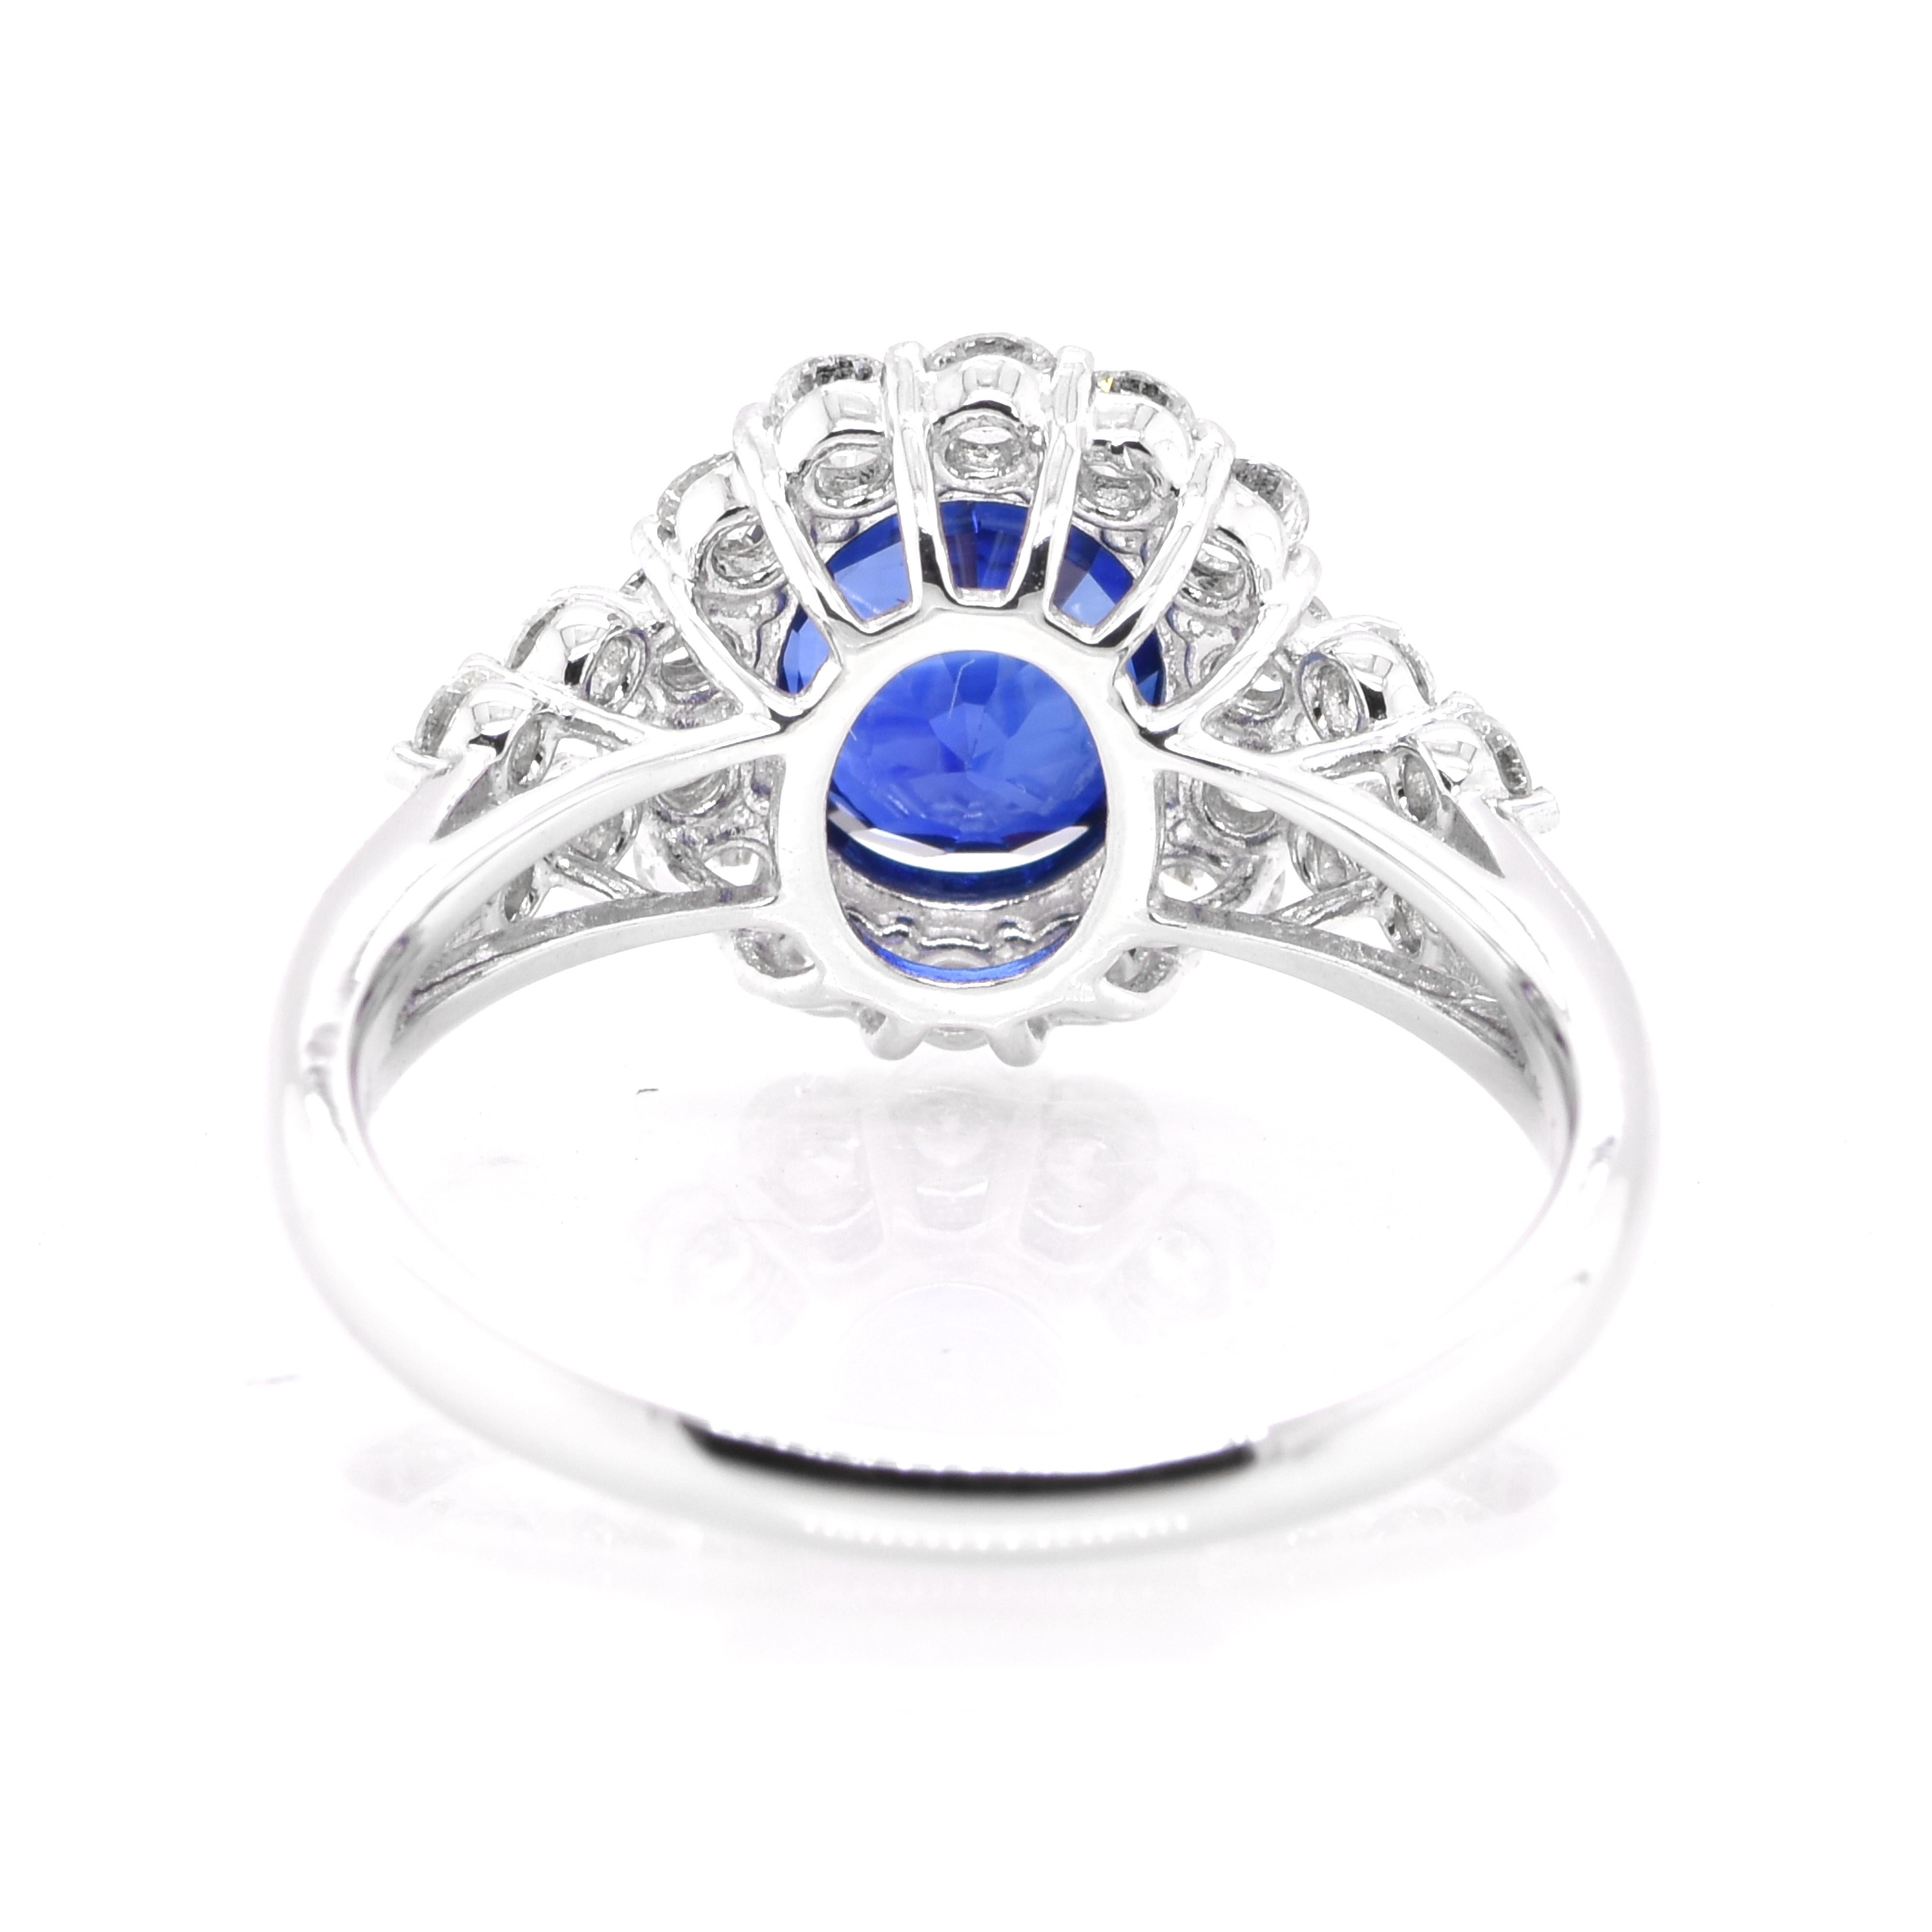 Women's 1.77 Carat Natural Madagascan Sapphire and Diamond Ring set in Platinum For Sale